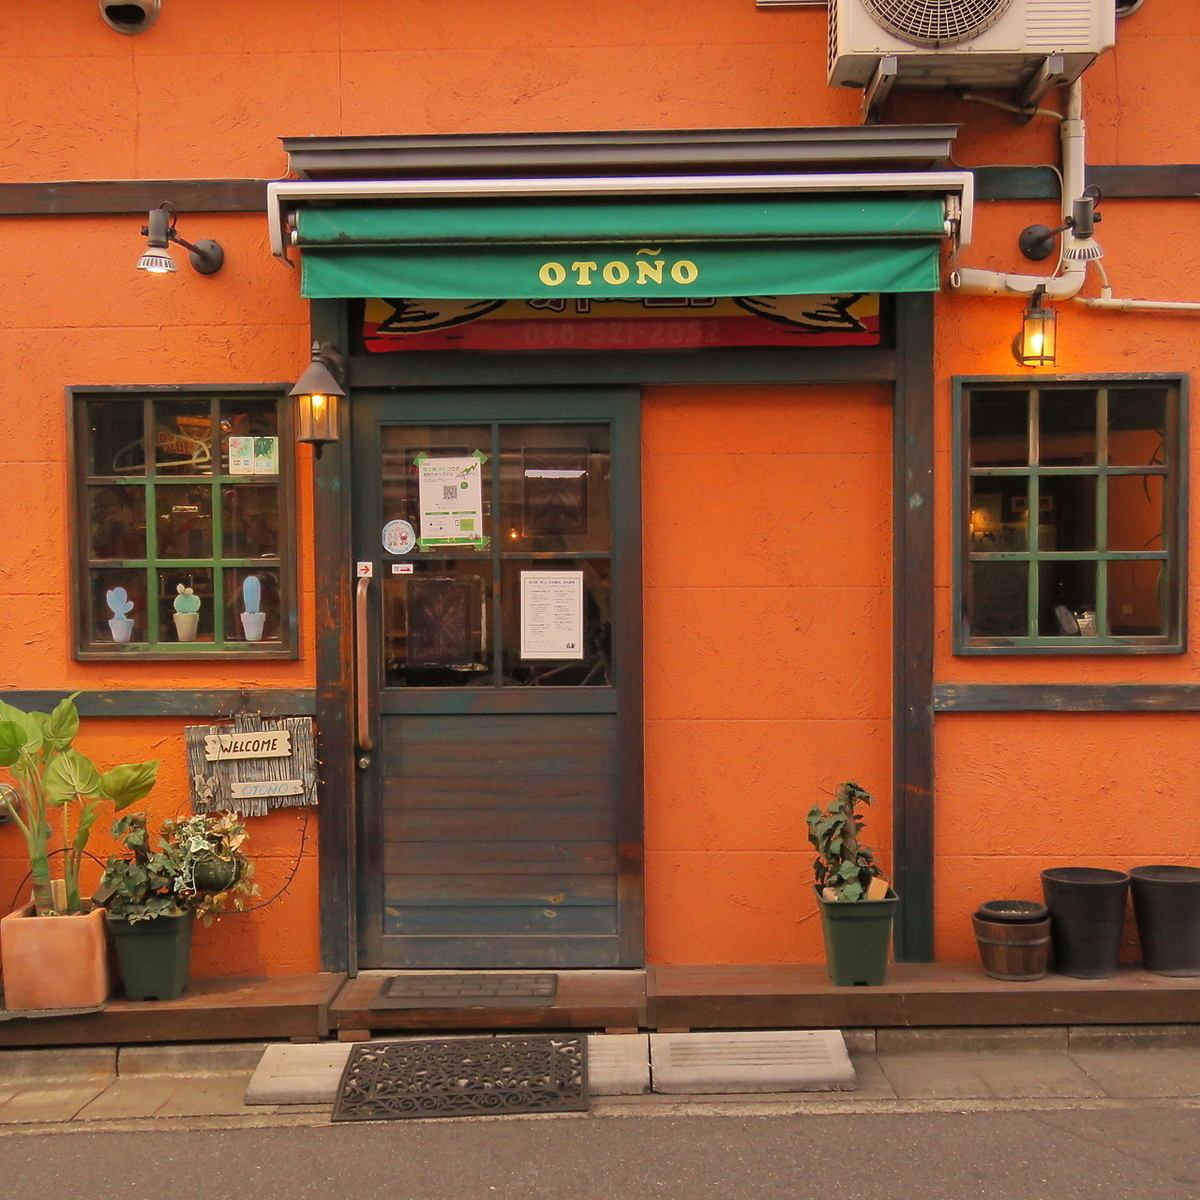 Located just outside the north exit of Kumagaya Station, this bar prides itself on its home-made Western dishes!